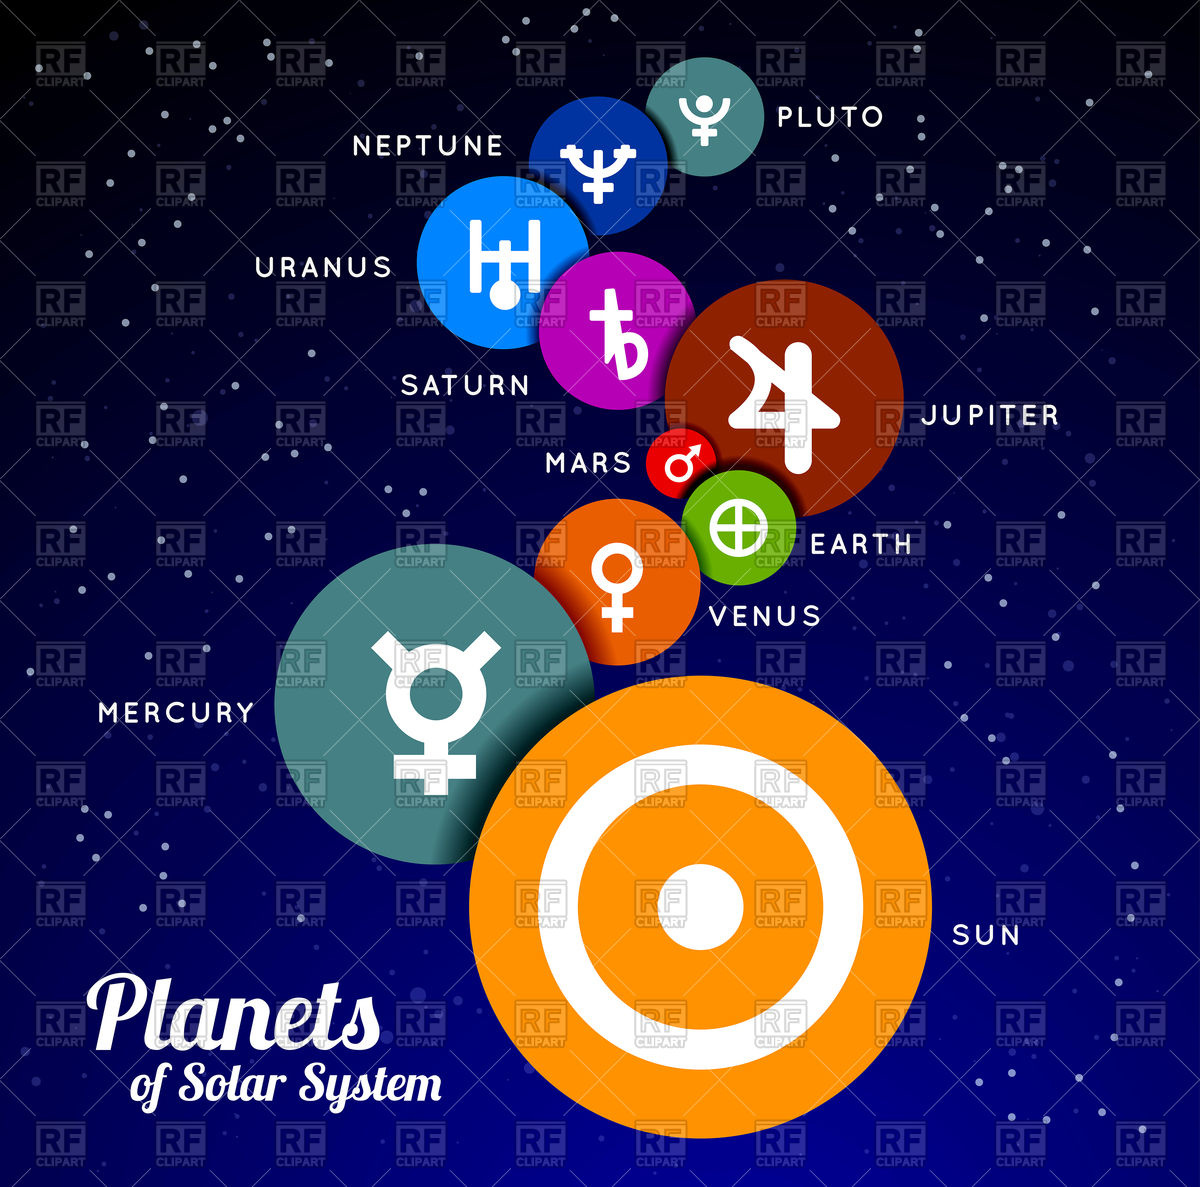 Planets of solar system vector image rfclipart 2